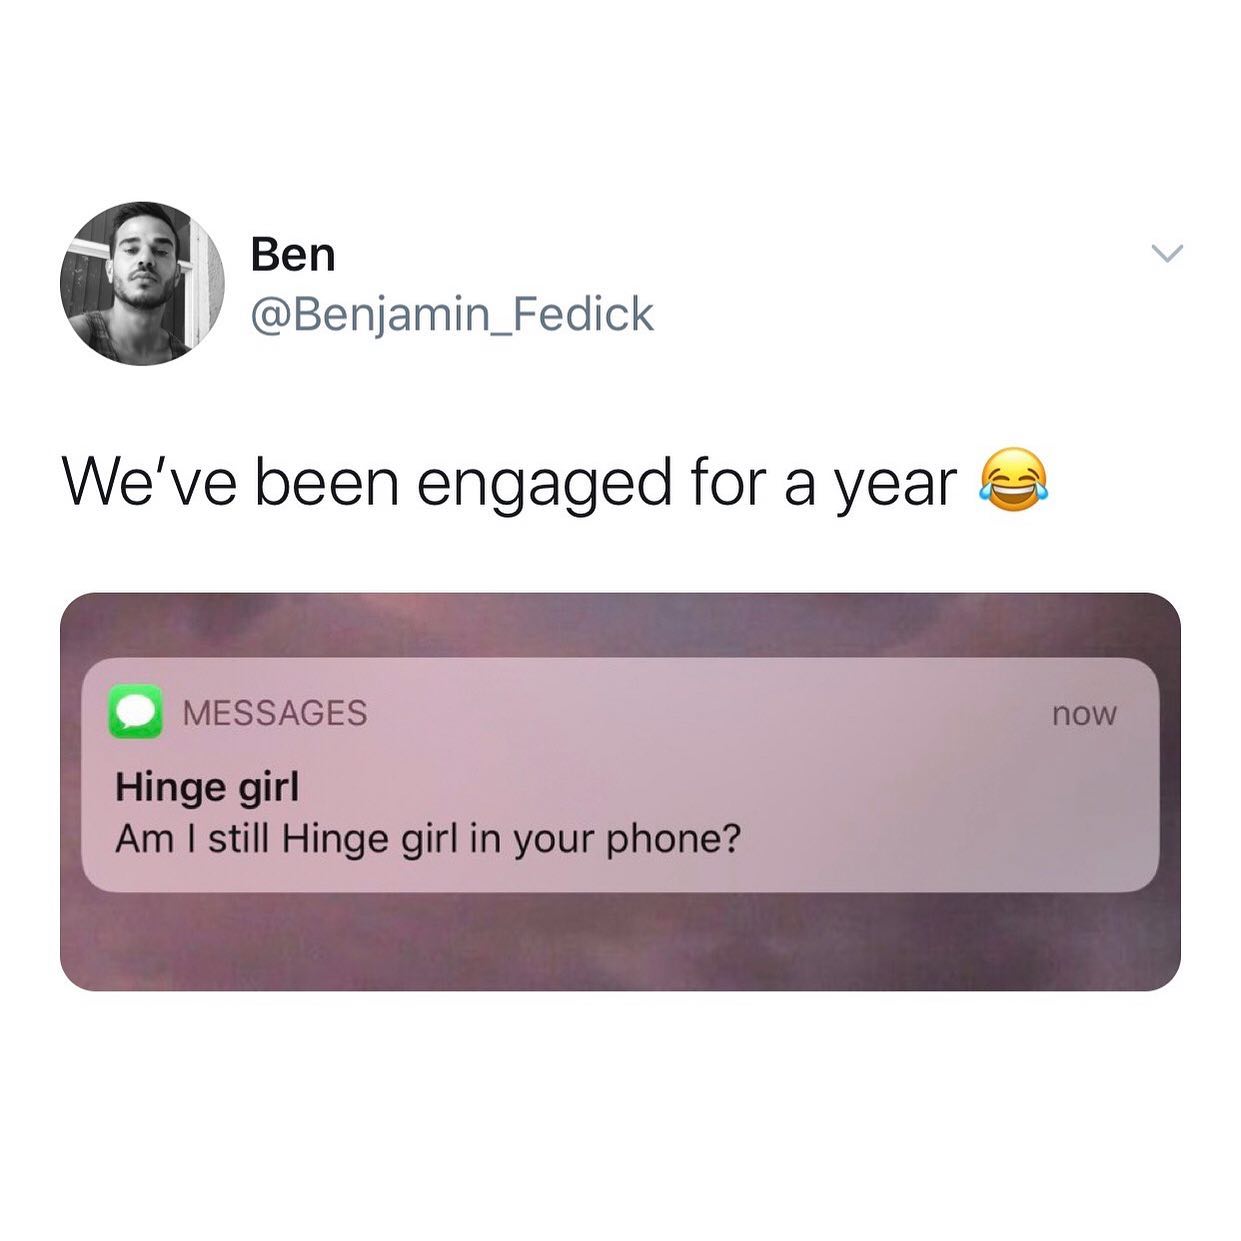 dank memes - twitter - multimedia - Ben We've been engaged for a year Messages now Hinge girl Am I still Hinge girl in your phone?